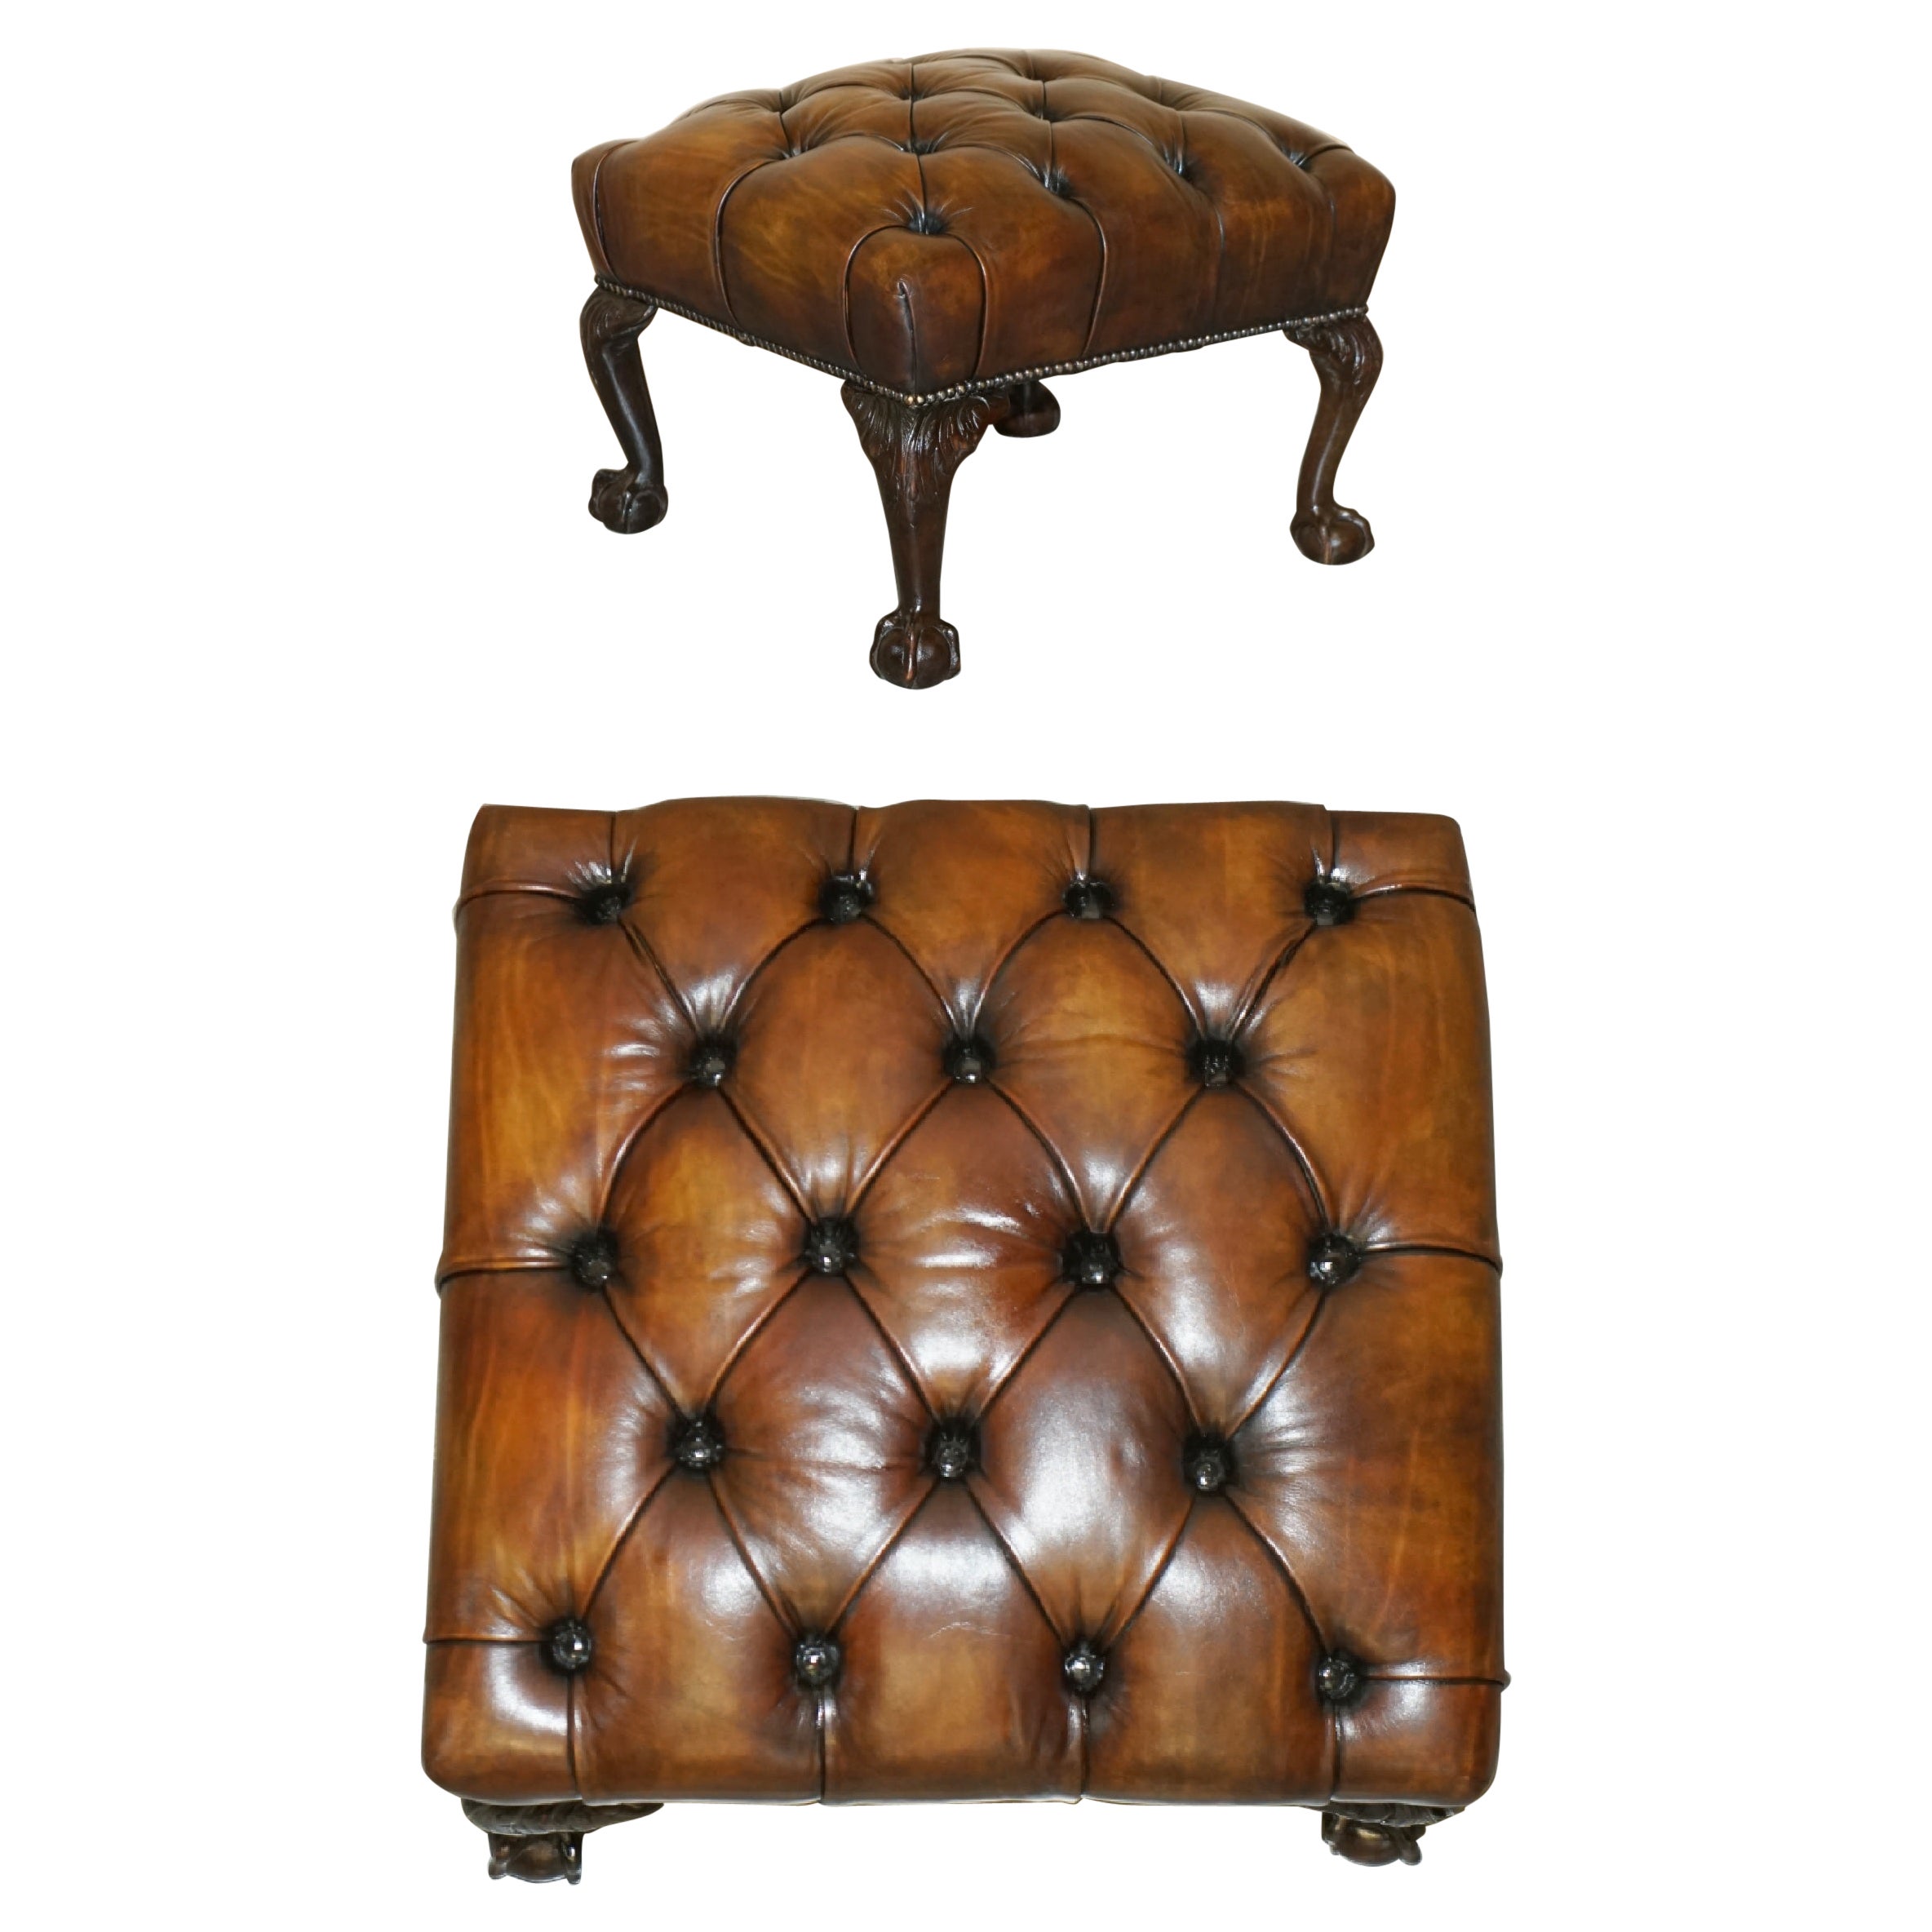 FINE ANTIQUE ViCTORIAN CLAW & BALL BROWN LEATHER RESTORED CHESTERFIELD FOOTSTOOL For Sale